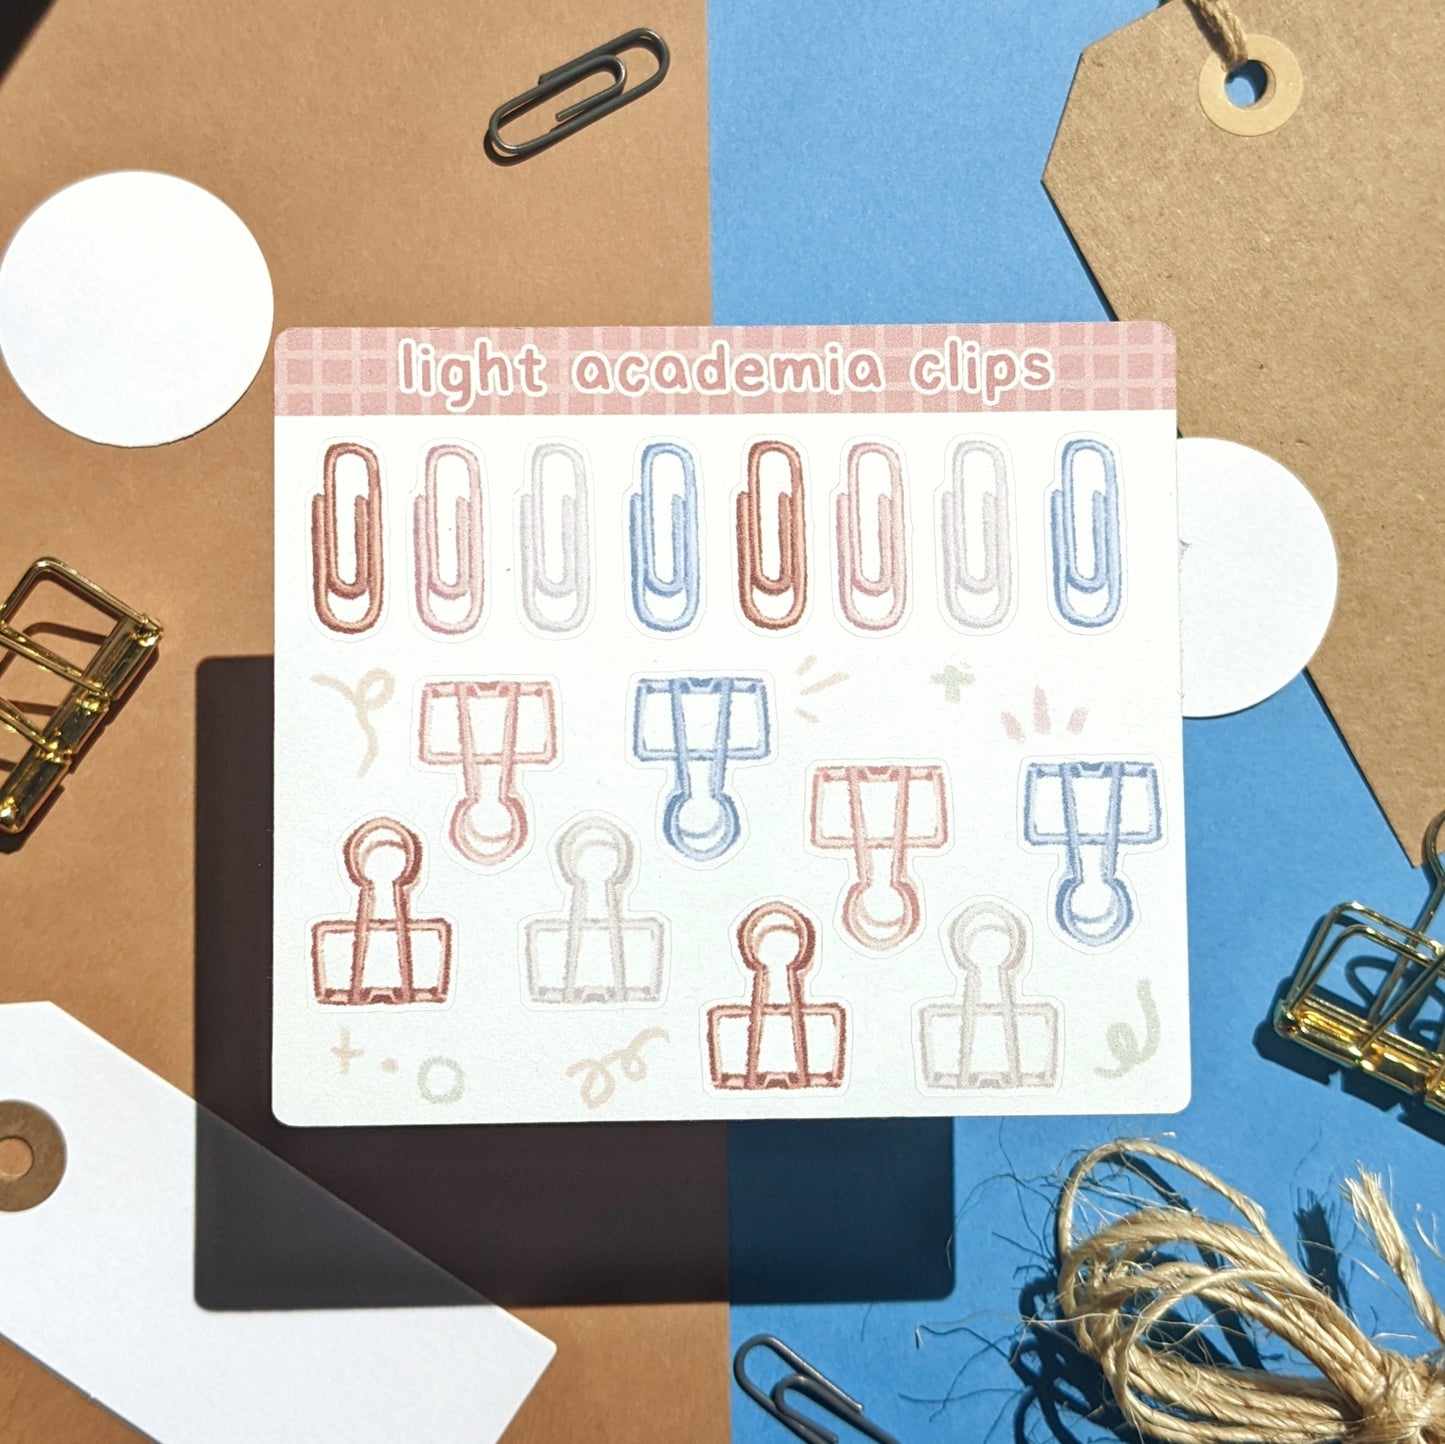 Sticker sheet with illustrations of paper clips and binder clips in bornw, pink, grey, and blue.